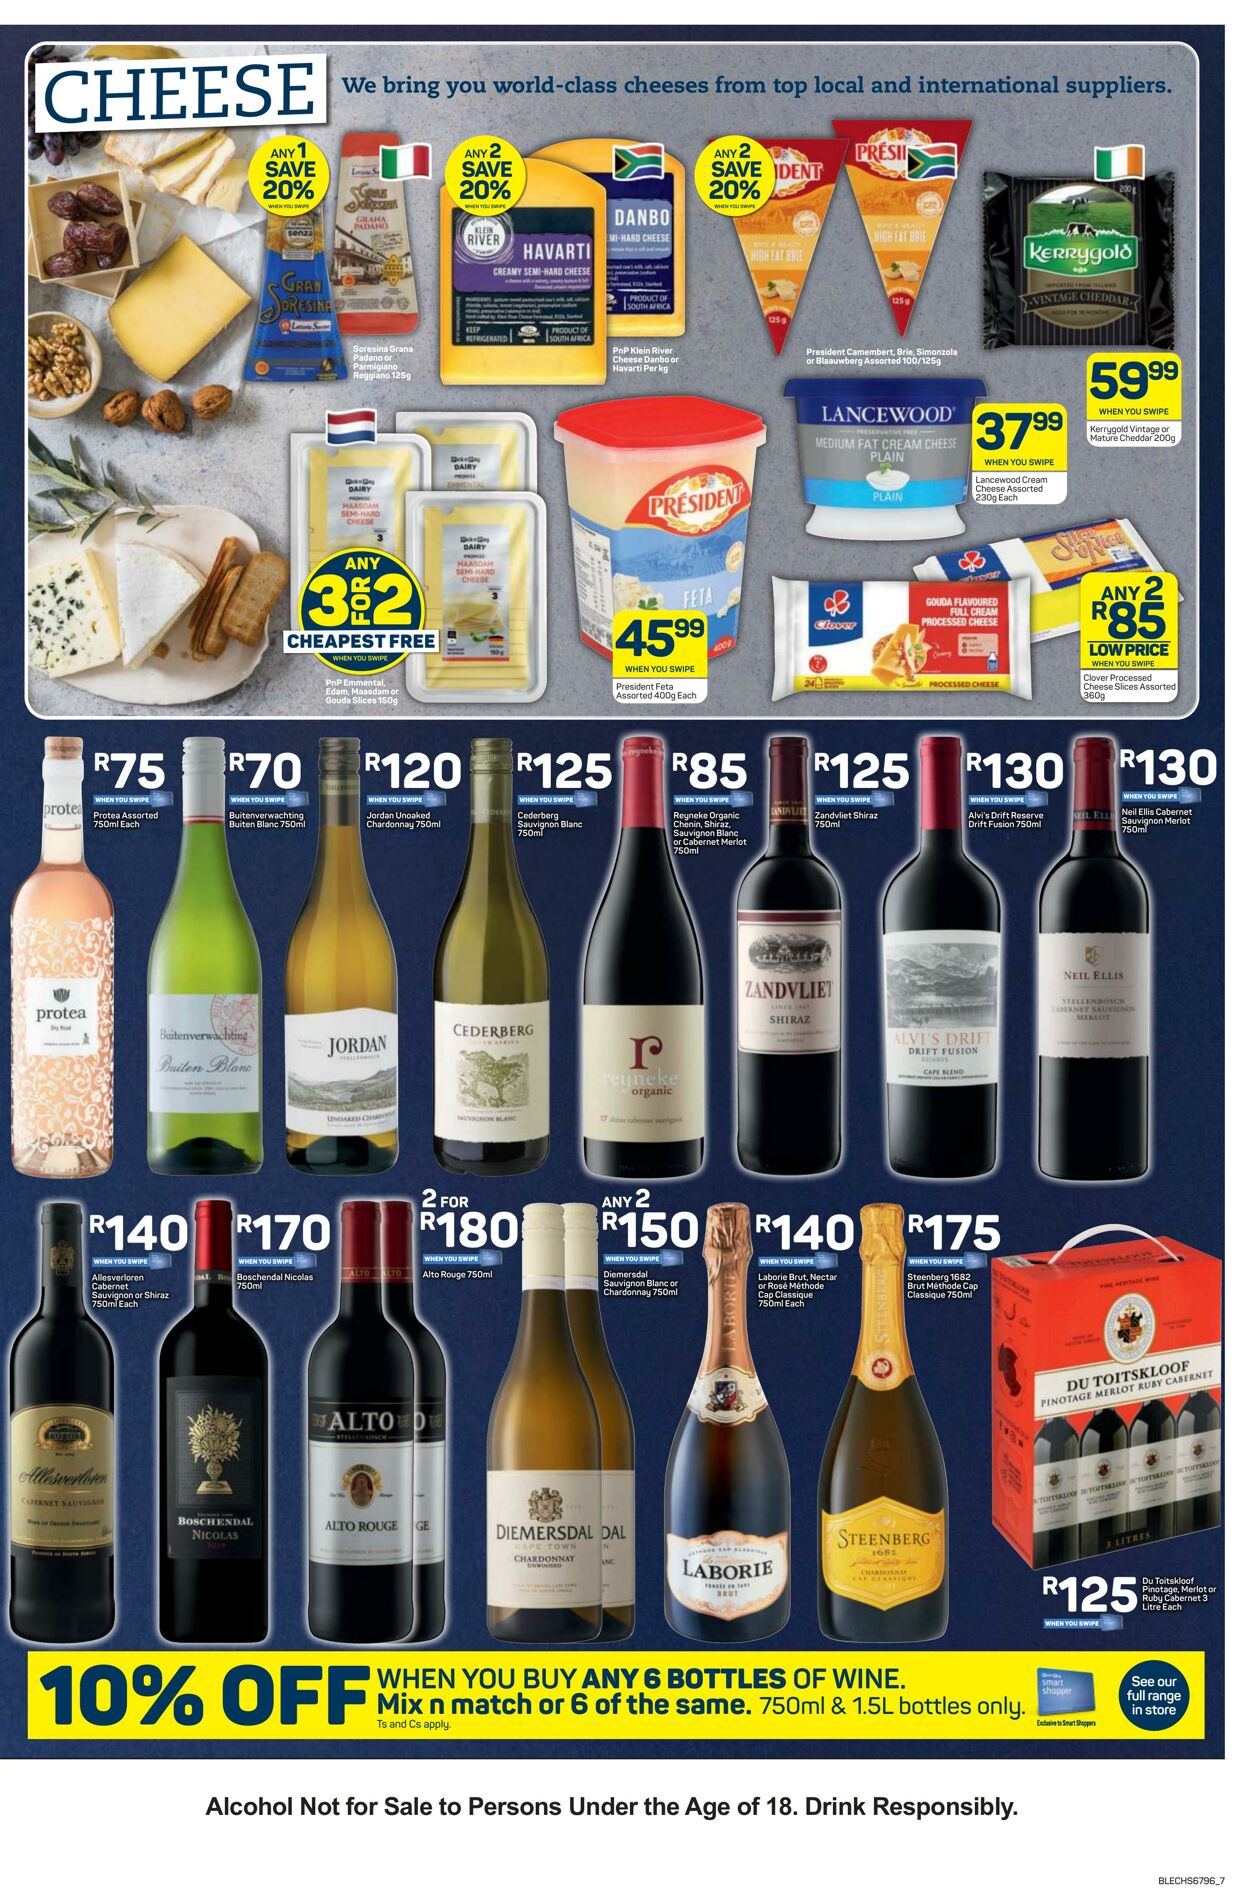 Special Pick n Pay 19.09.2022-02.10.2022